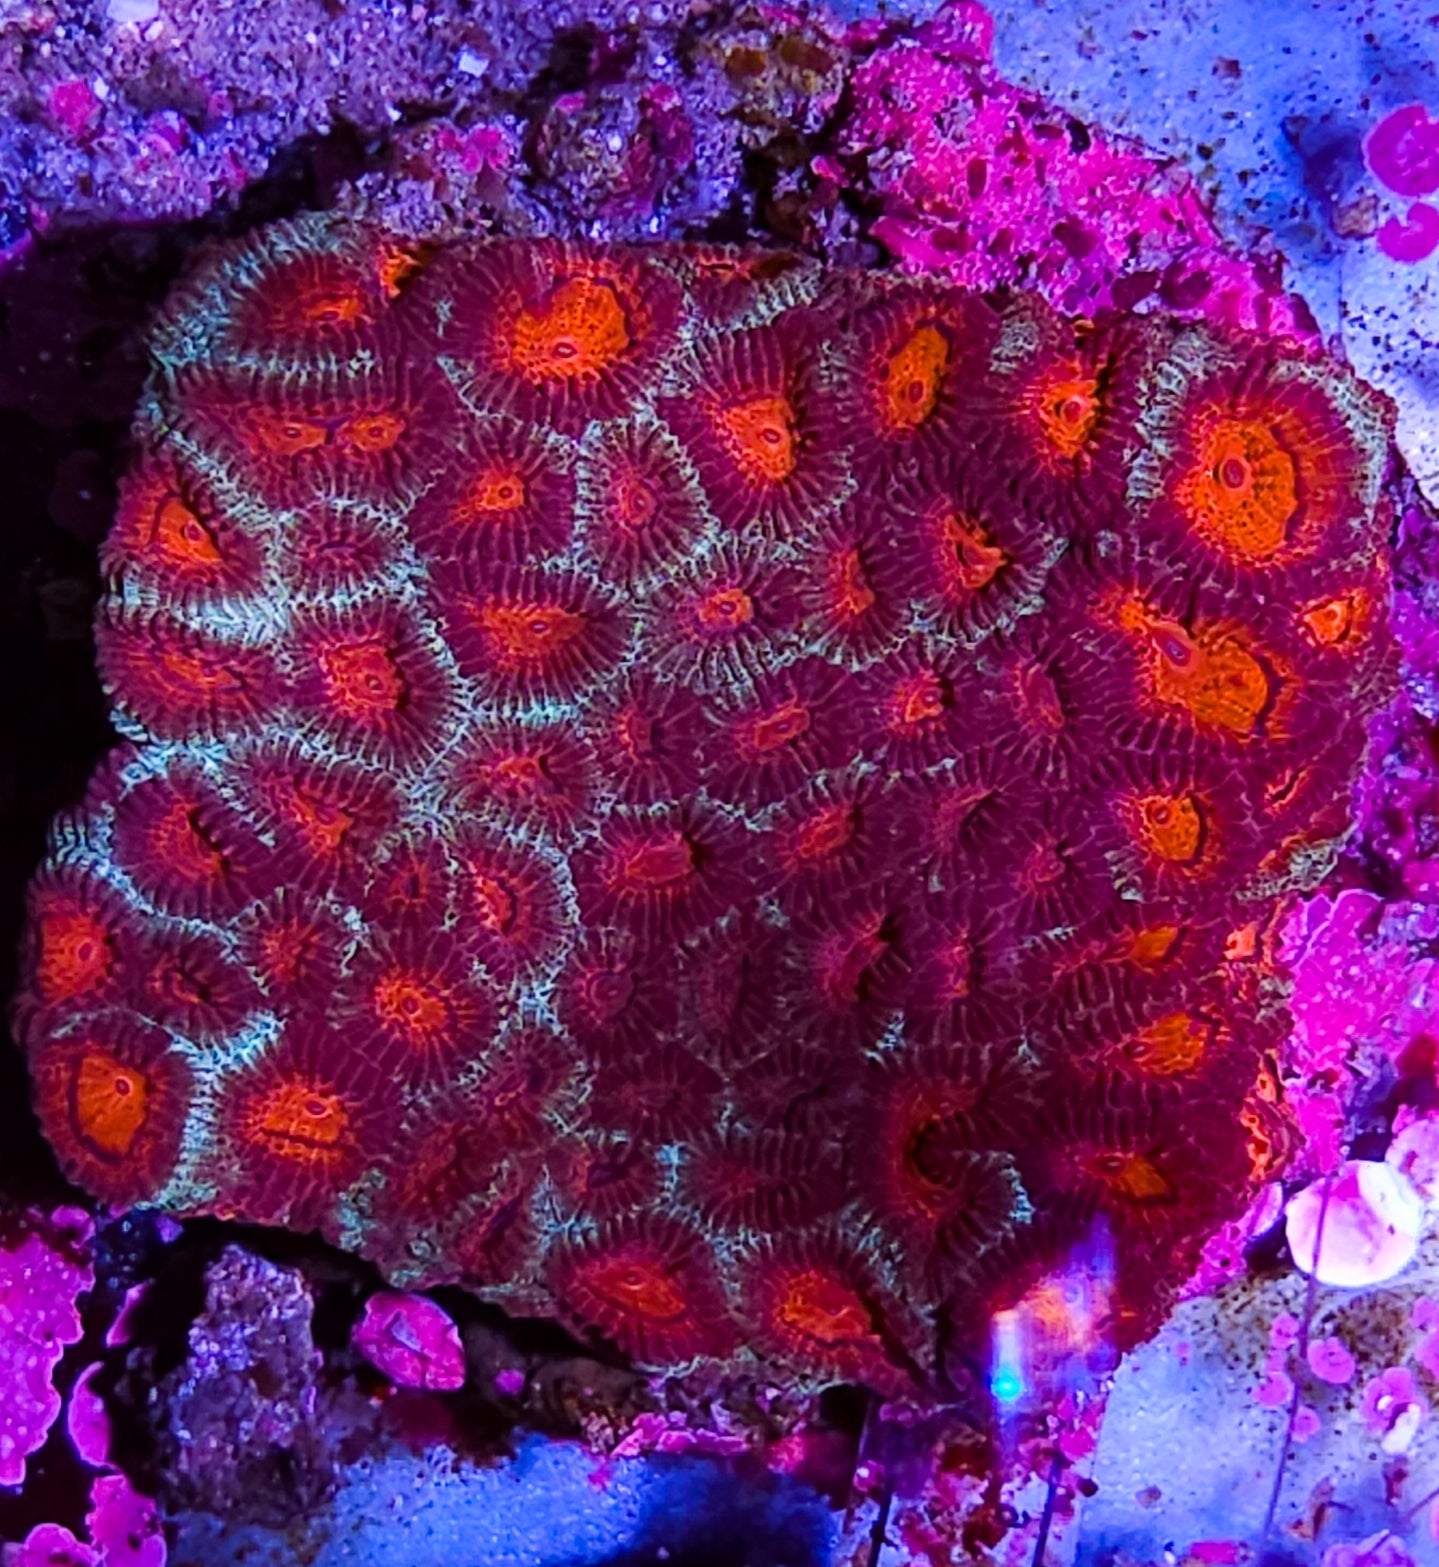 WYSIWYG L/G Red and Green Favia coral new